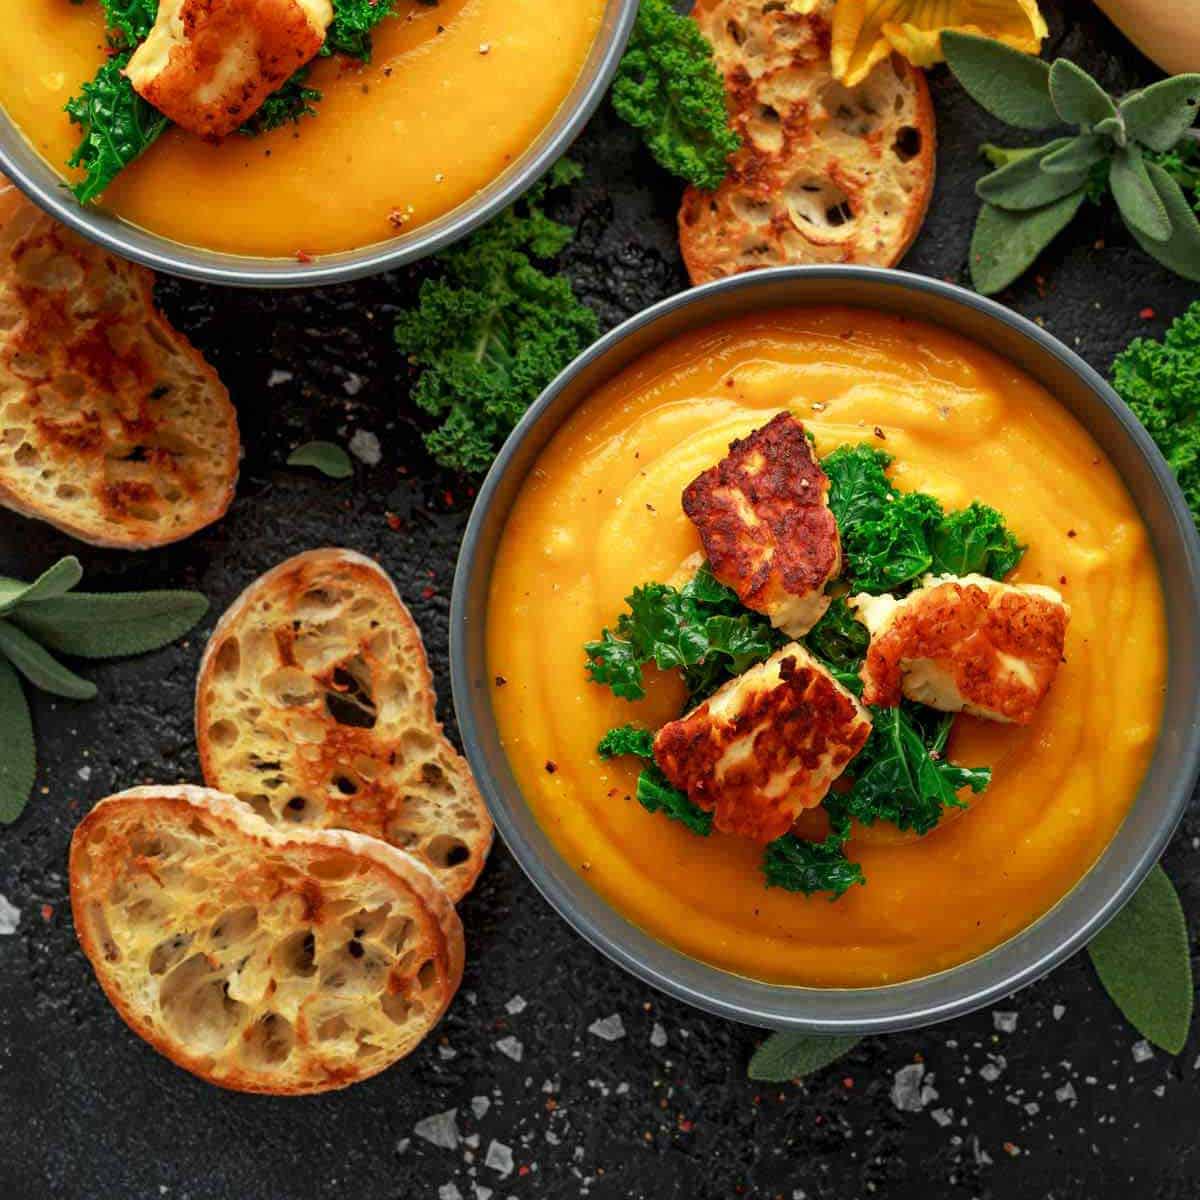 Two bowls of butternut squash soup garnished with greens and croutons.